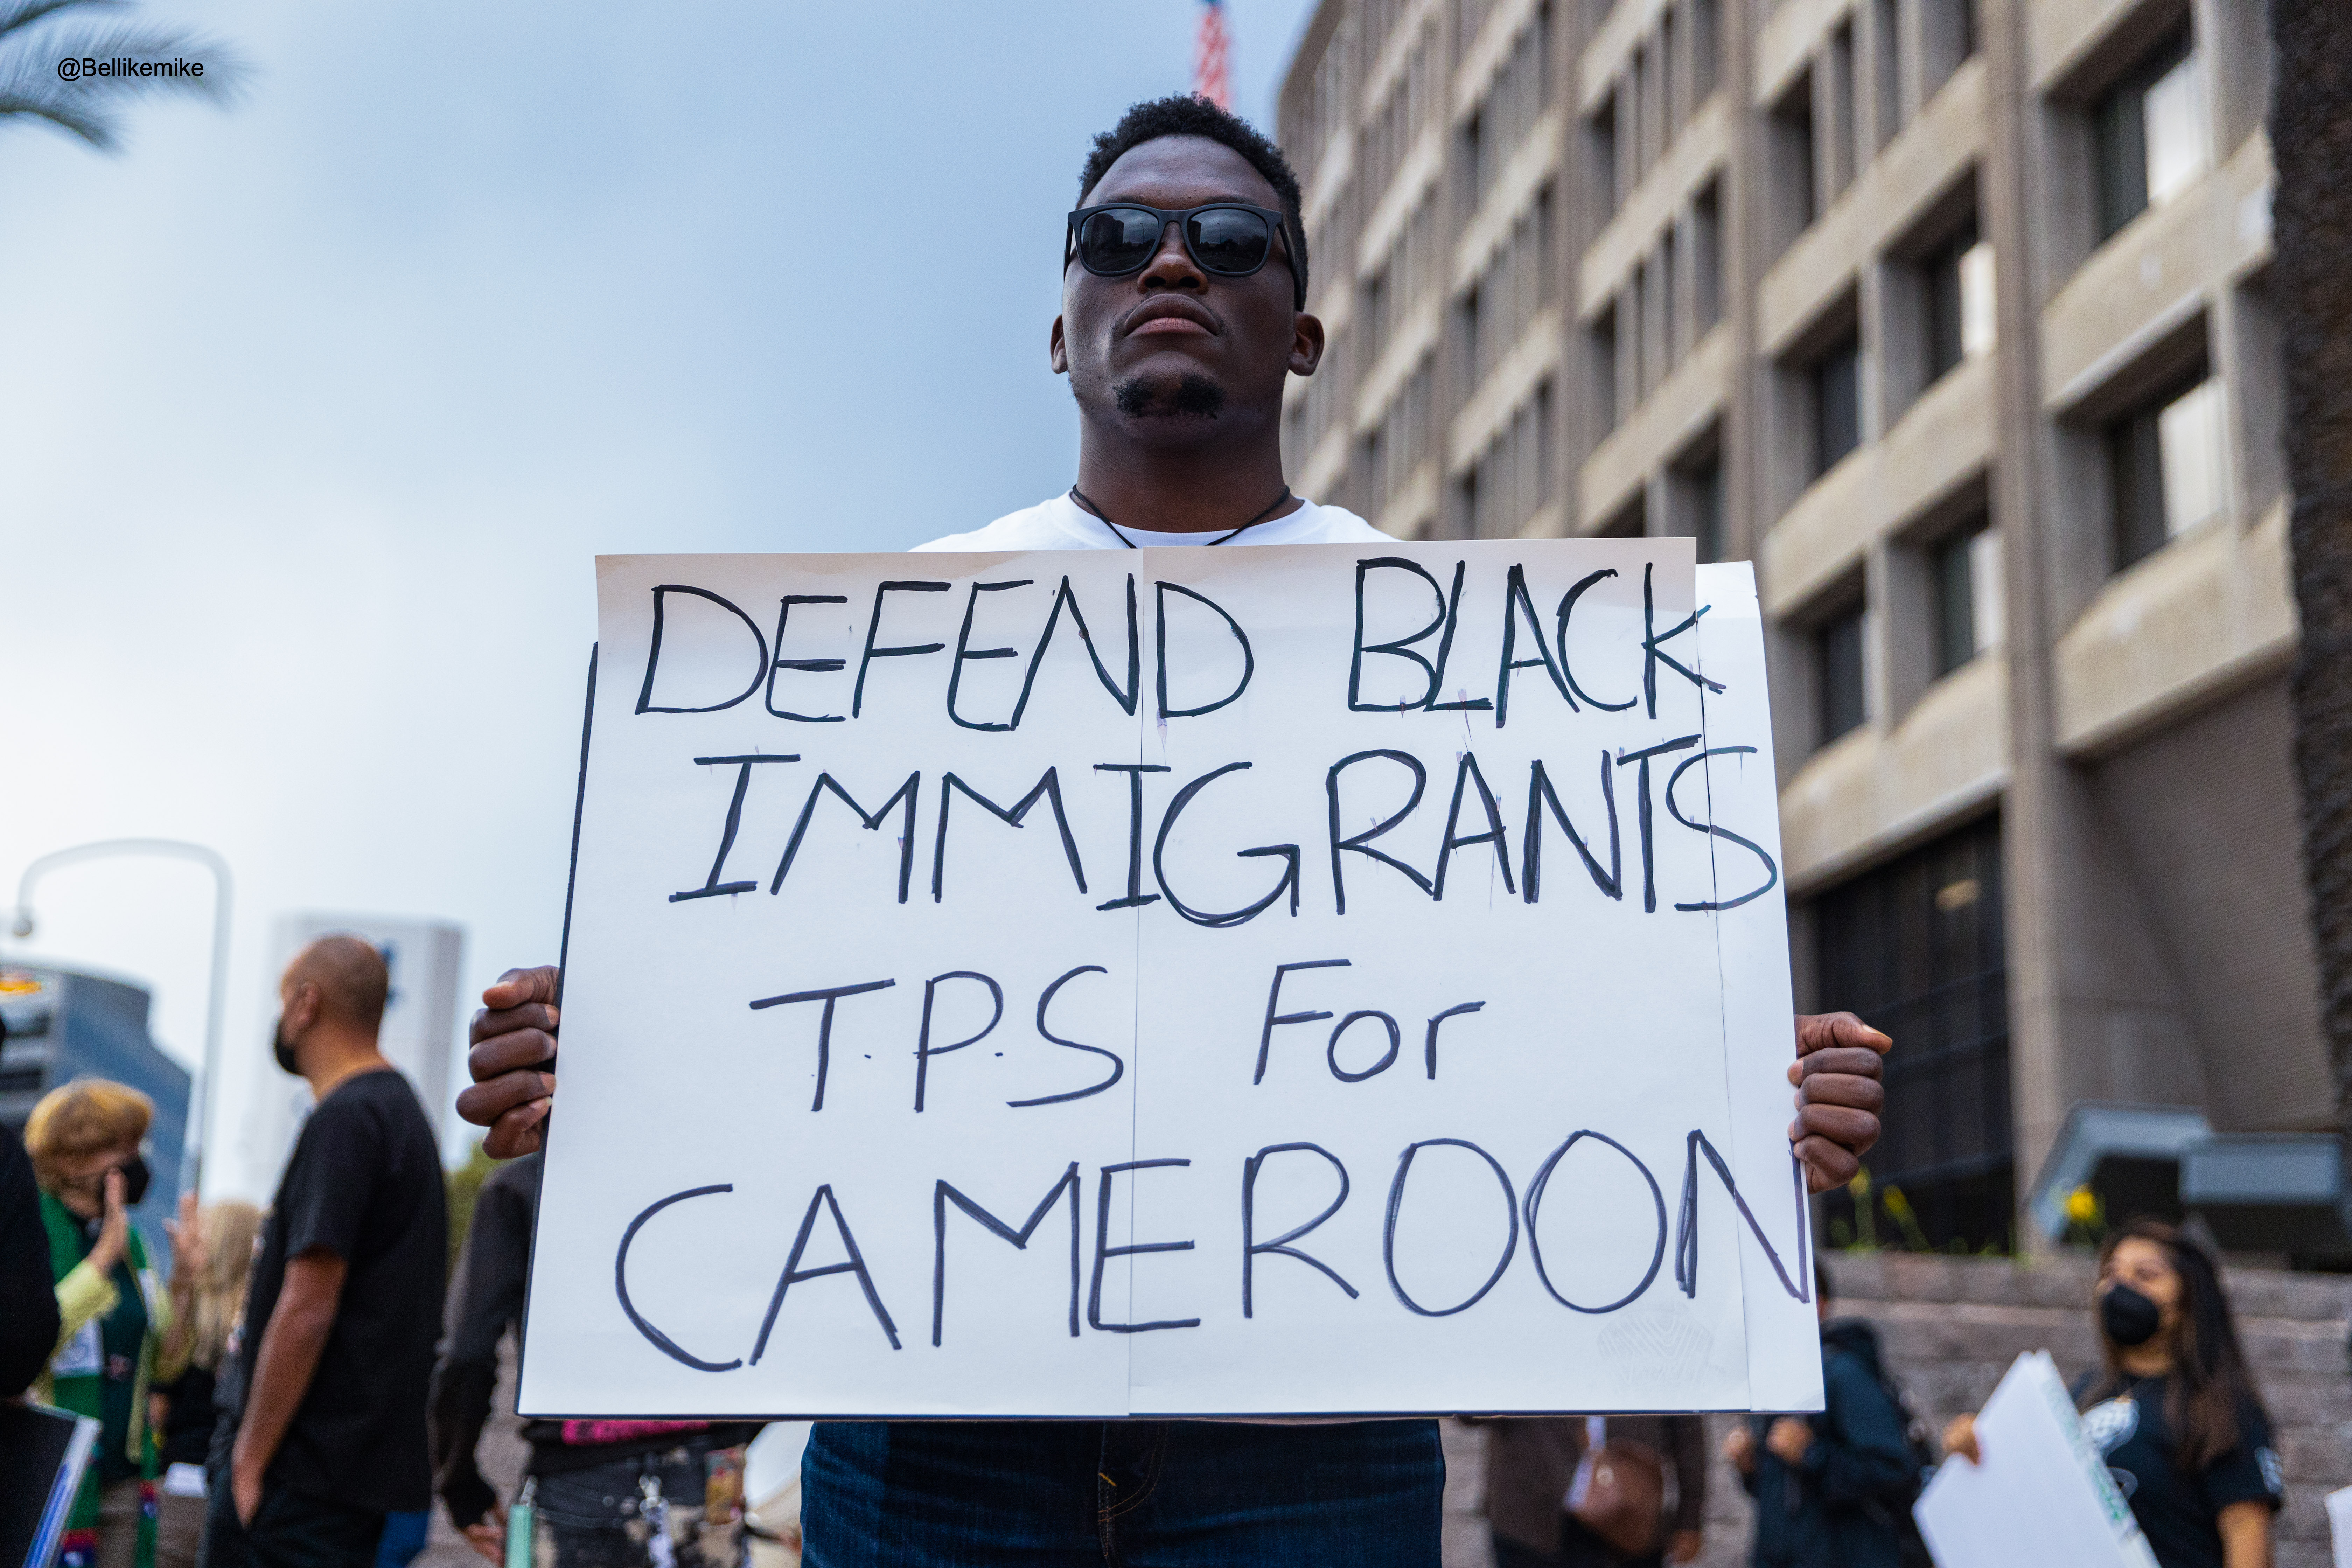 protestor holds sign: defend black immigrants tps for cameroon